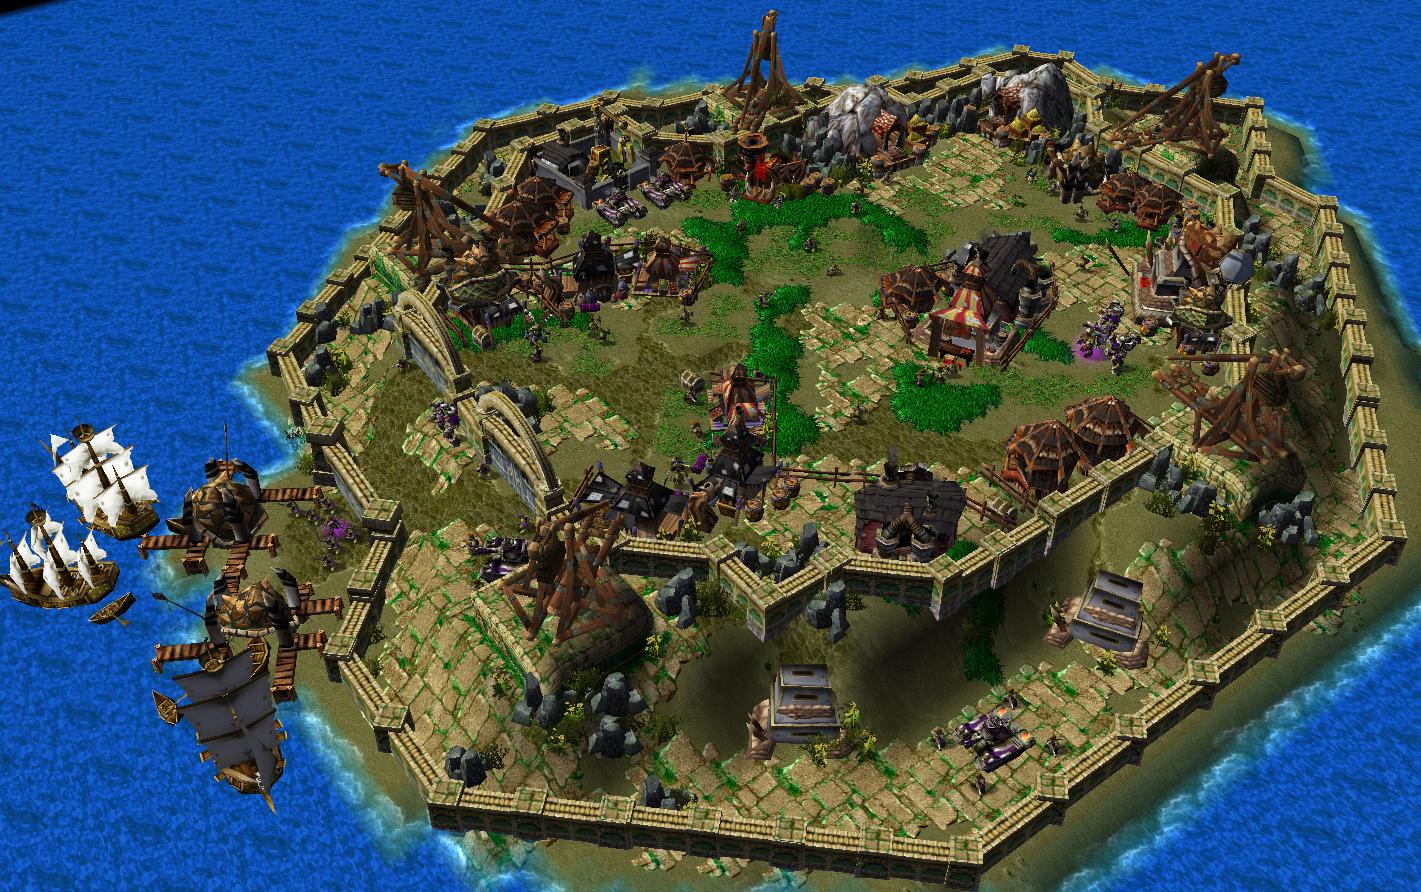 So this is it - Island Knox! The main Fortress and hometown to the Mechabutt Goblin Clan, lead by Chief Warplord. As you can see it is well guarded by